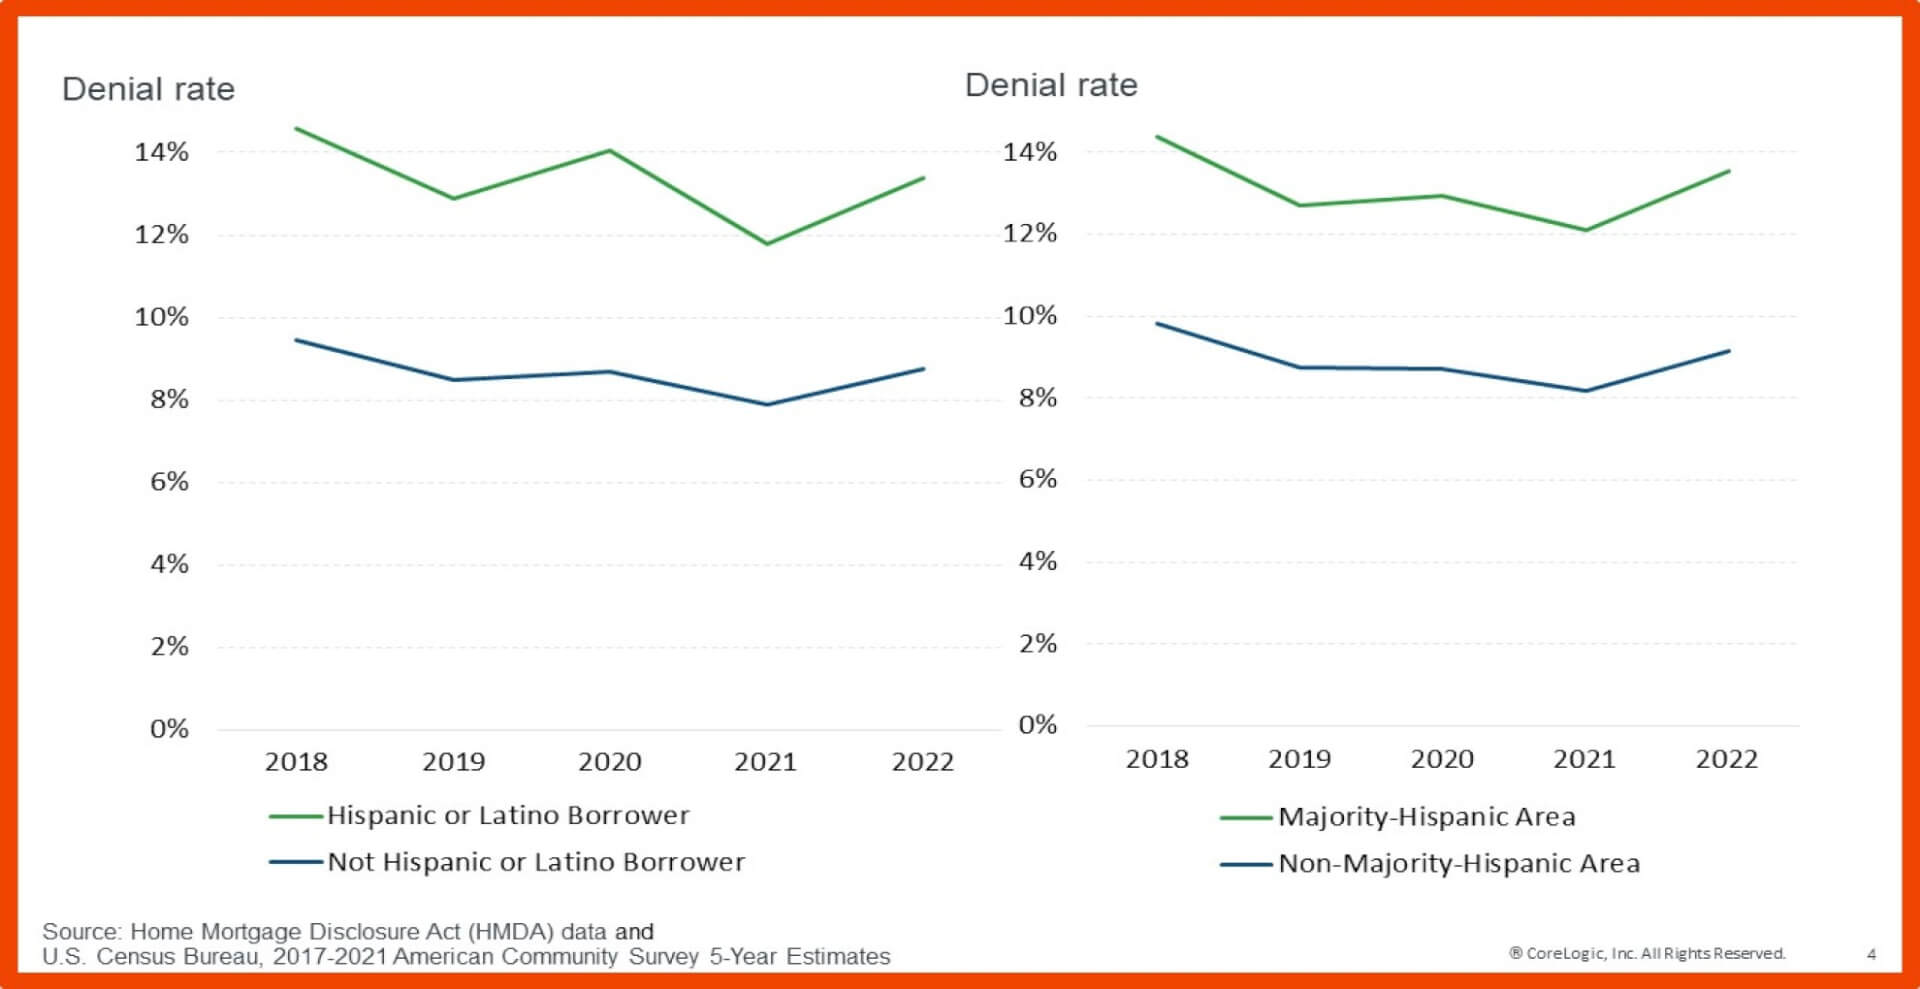 Mortgage denial rates by demographic and area, 2018 - 2022